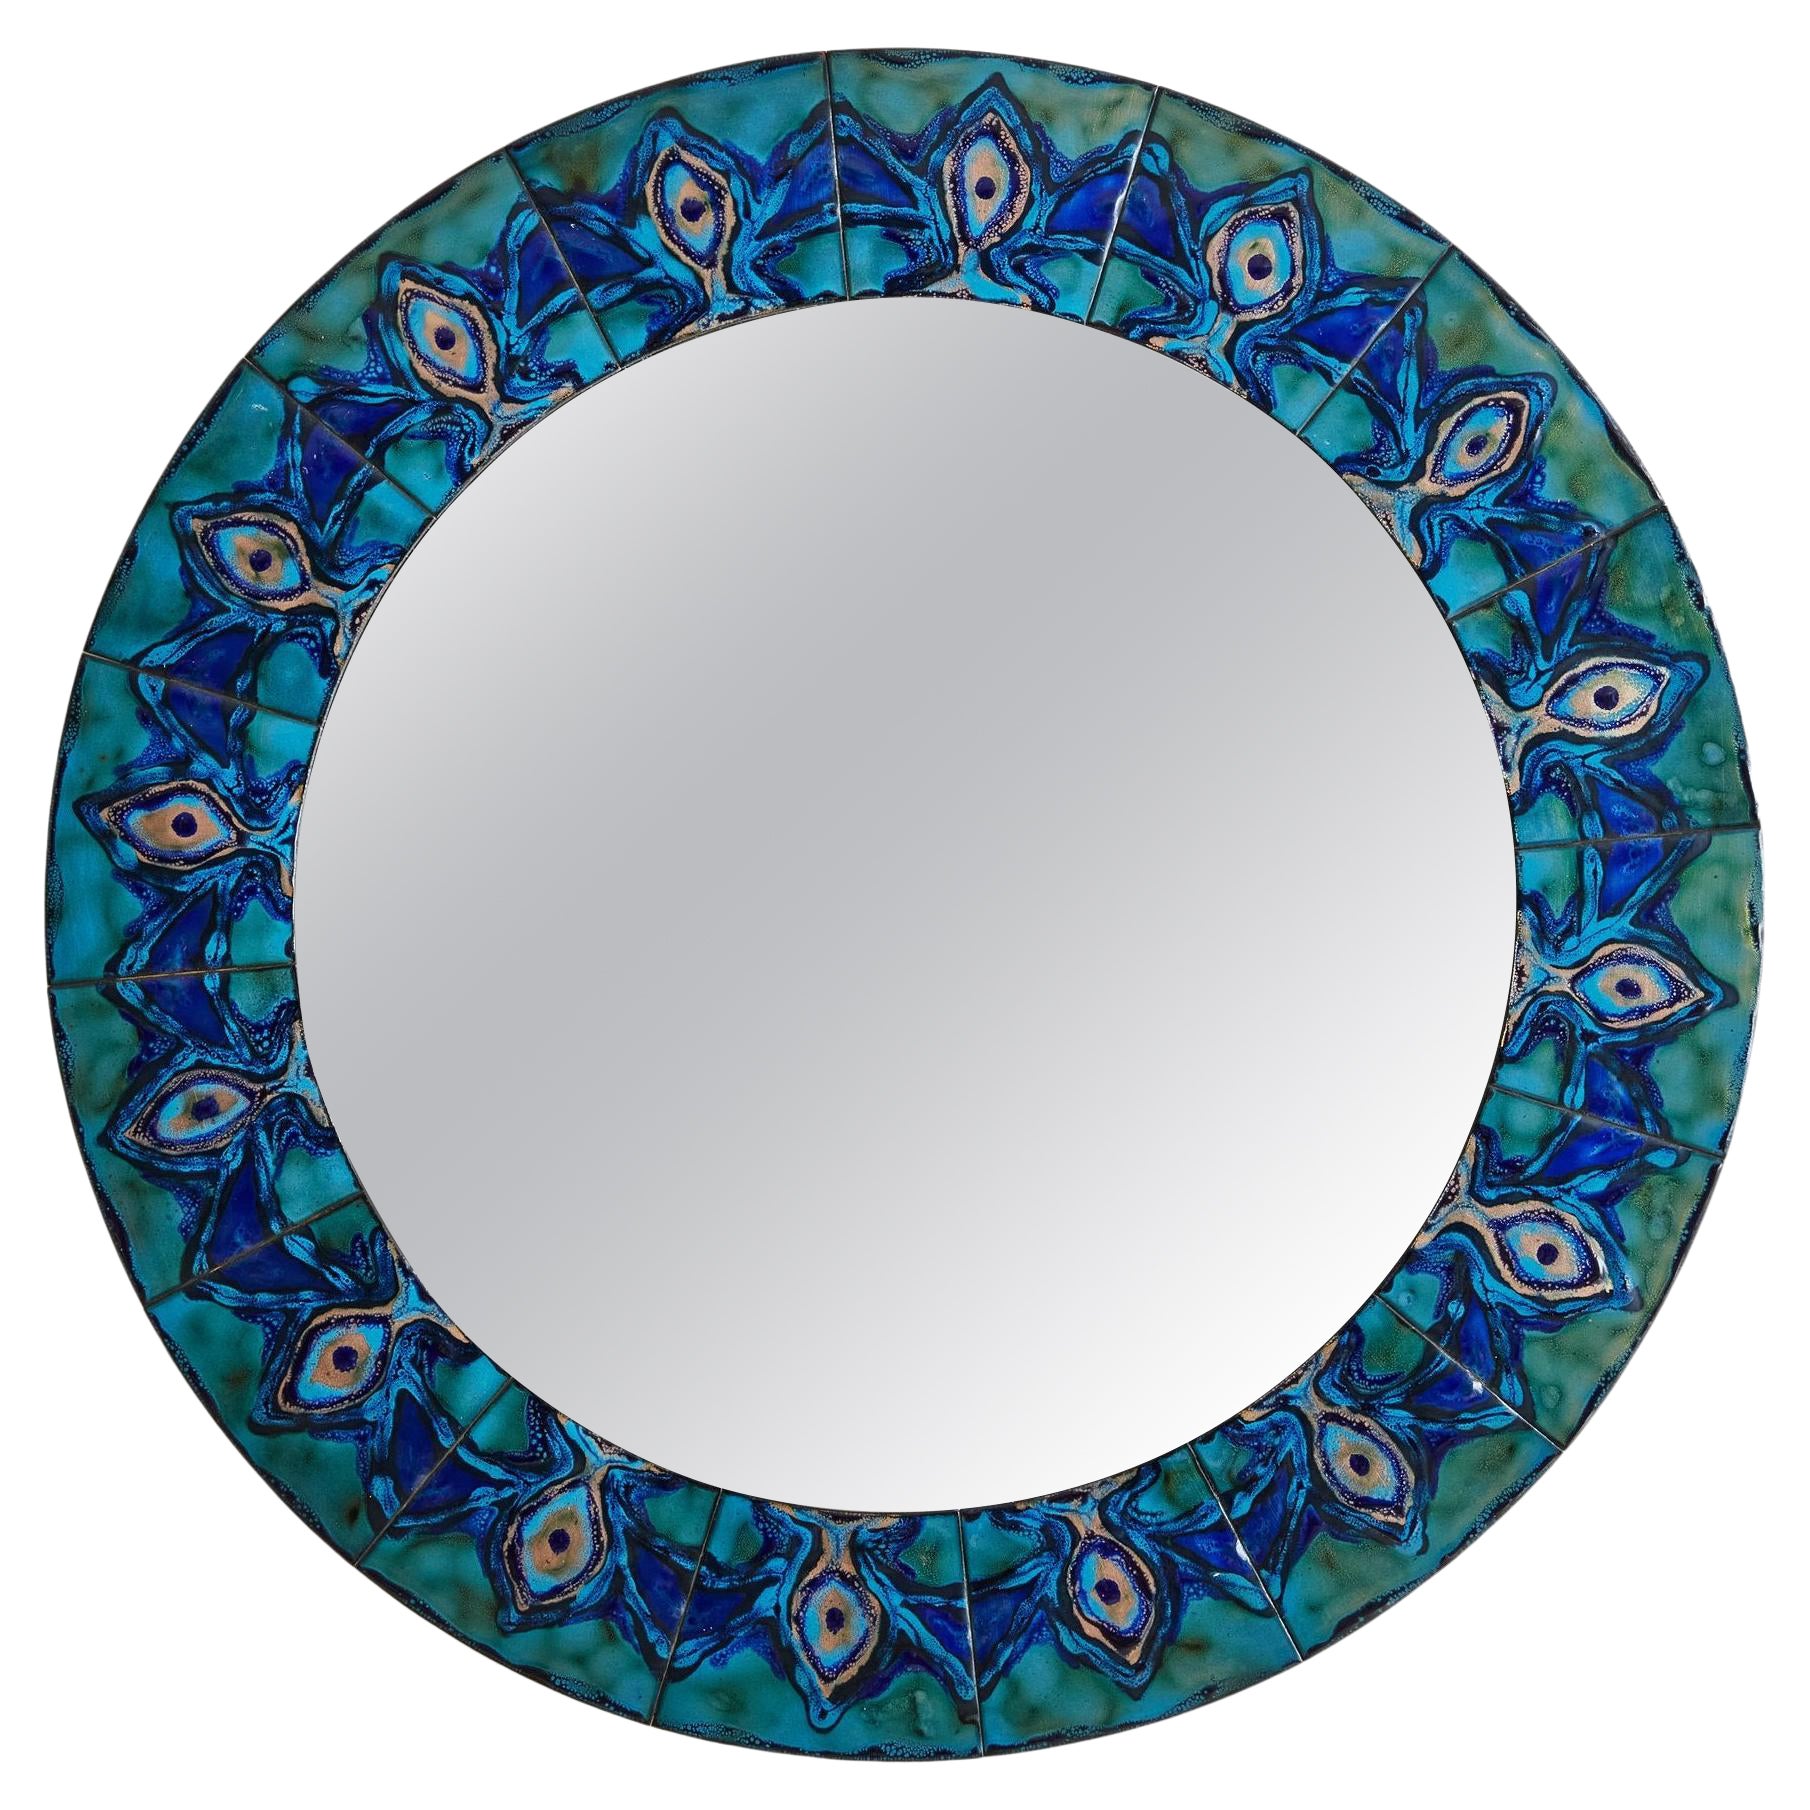 1/5 Blue Hand-Painted Enamel Mirror by Bodil Eje, Denmark 1960s For Sale